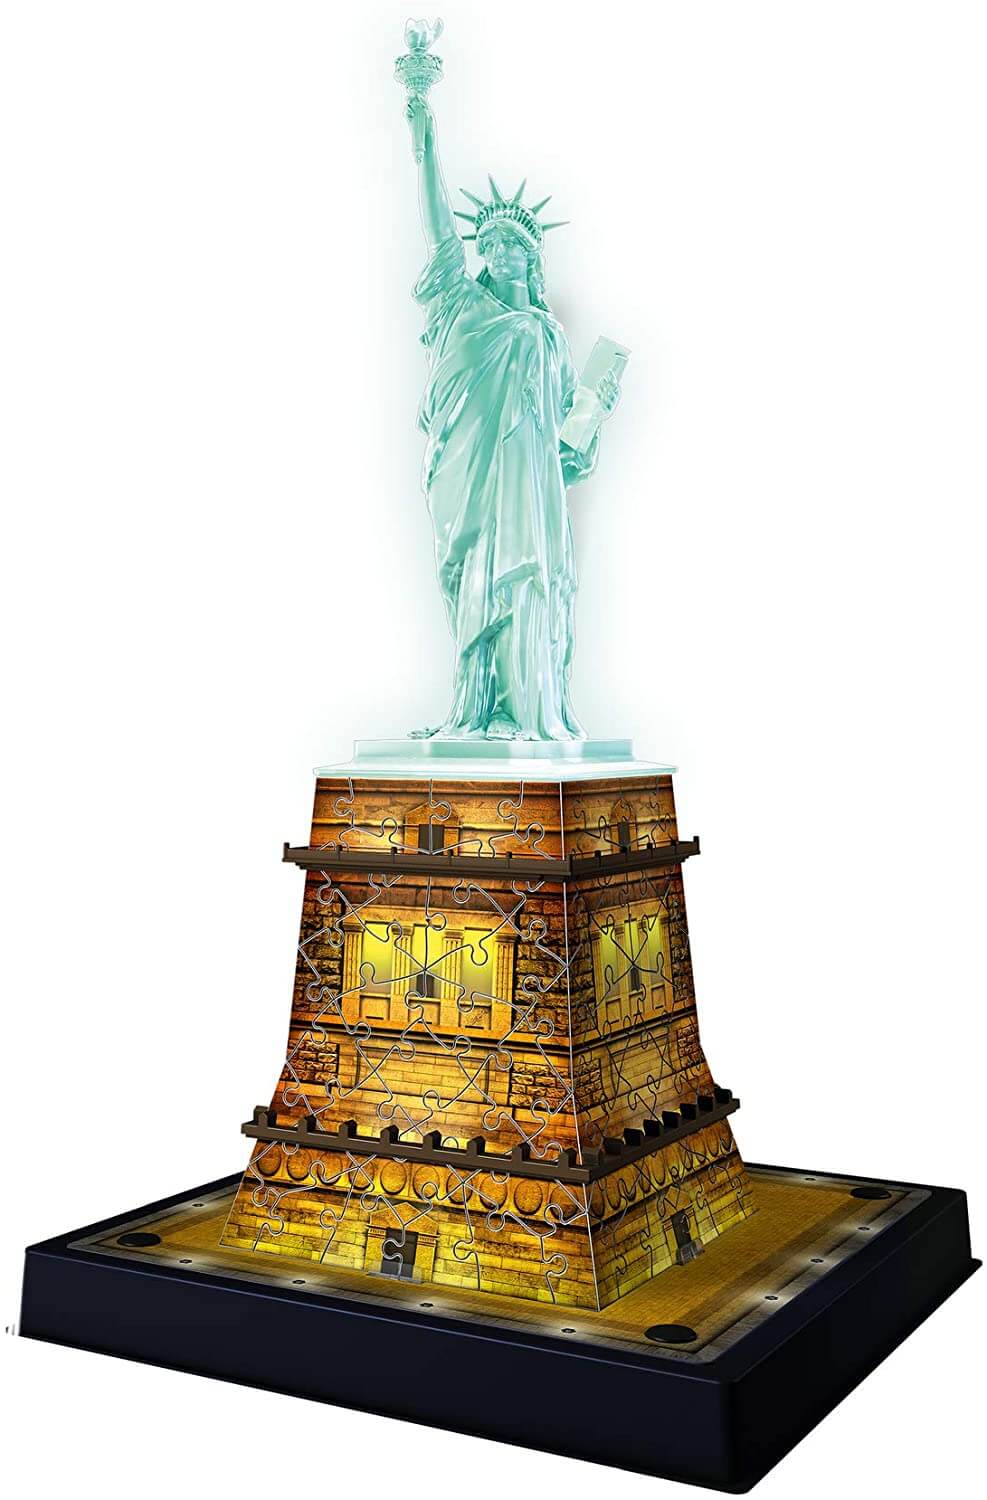 Ravensburger 3D Buildings - Statue of Liberty - Night Edition